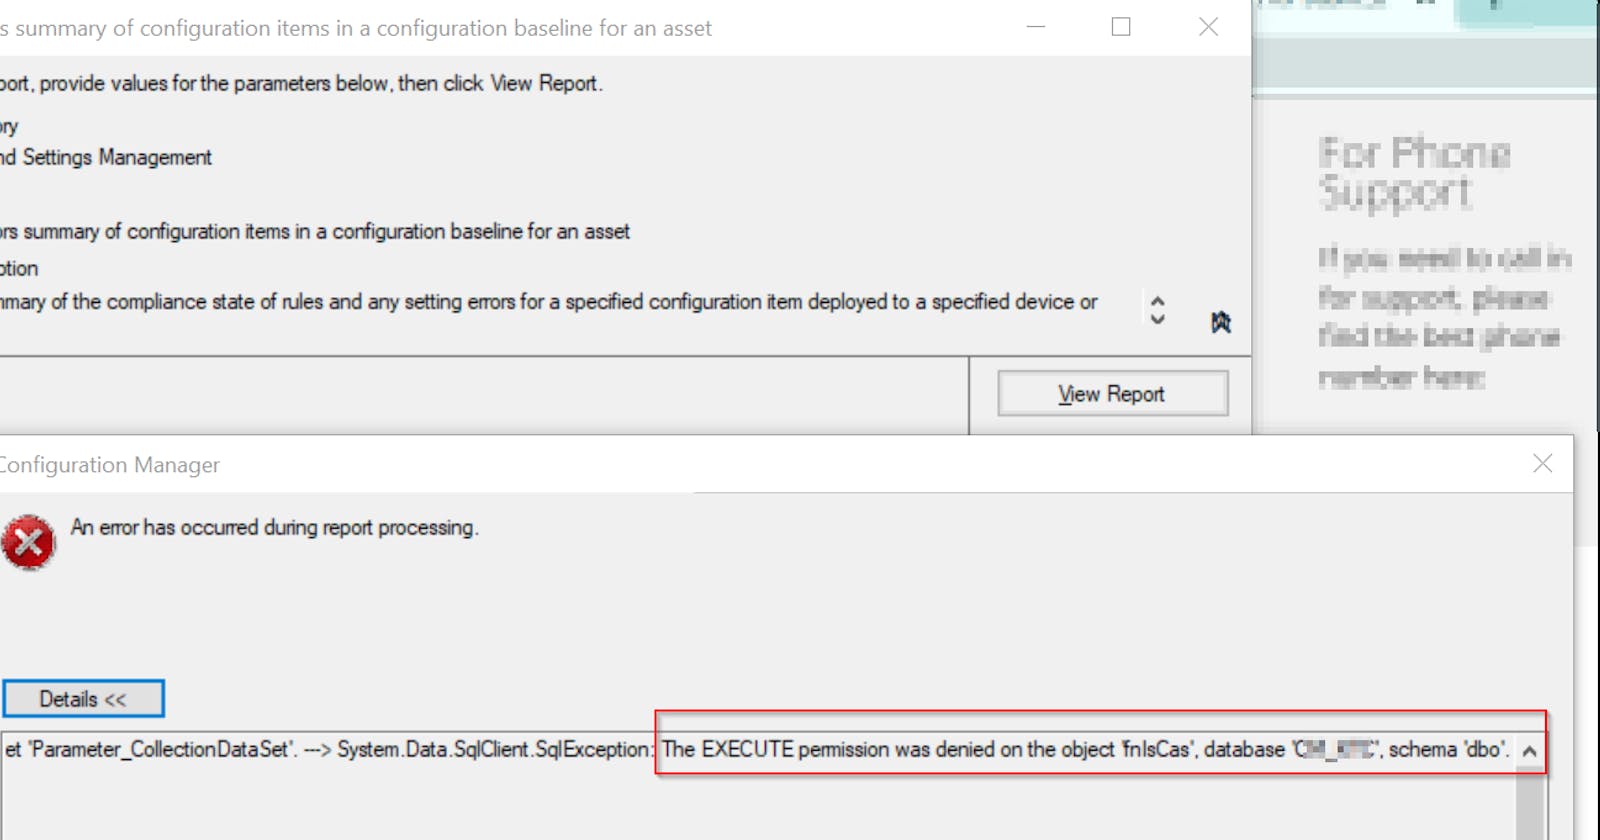 The solution to the SCCM error "EXECUTE permission was denied on the object 'fnlsCas'" when opening some of the Reports